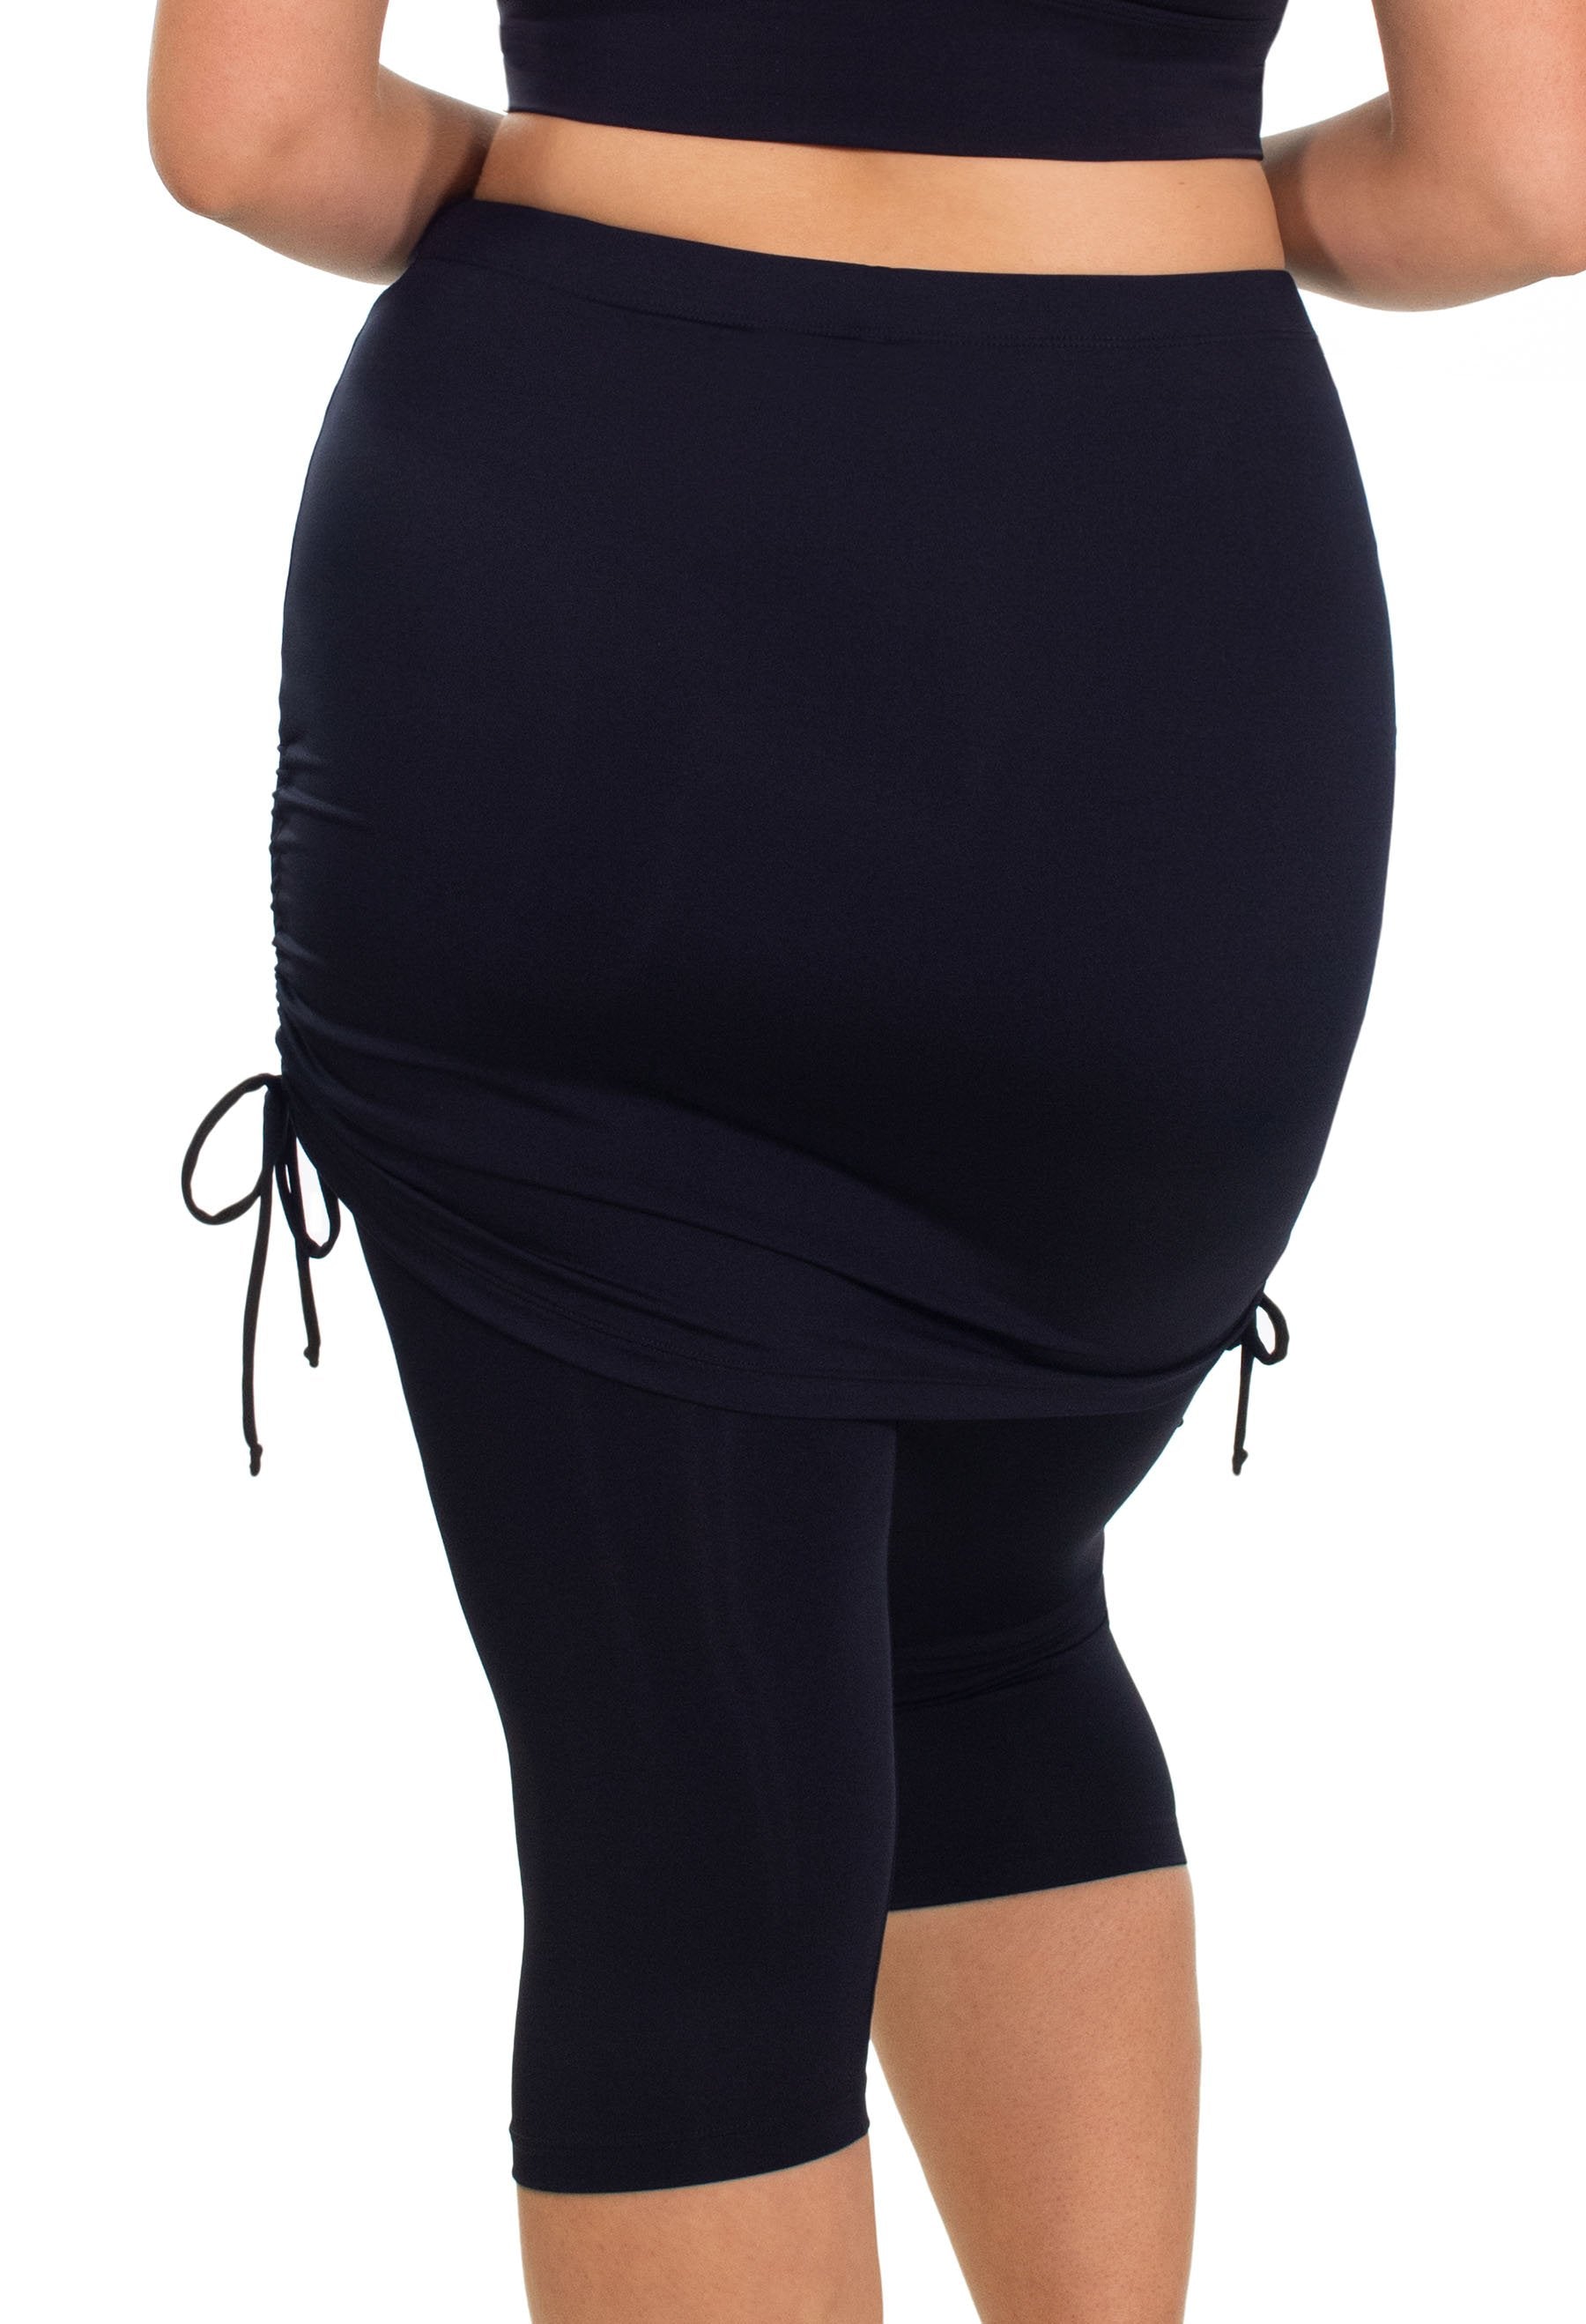 Anti Chafing Swim Tights with Skirt